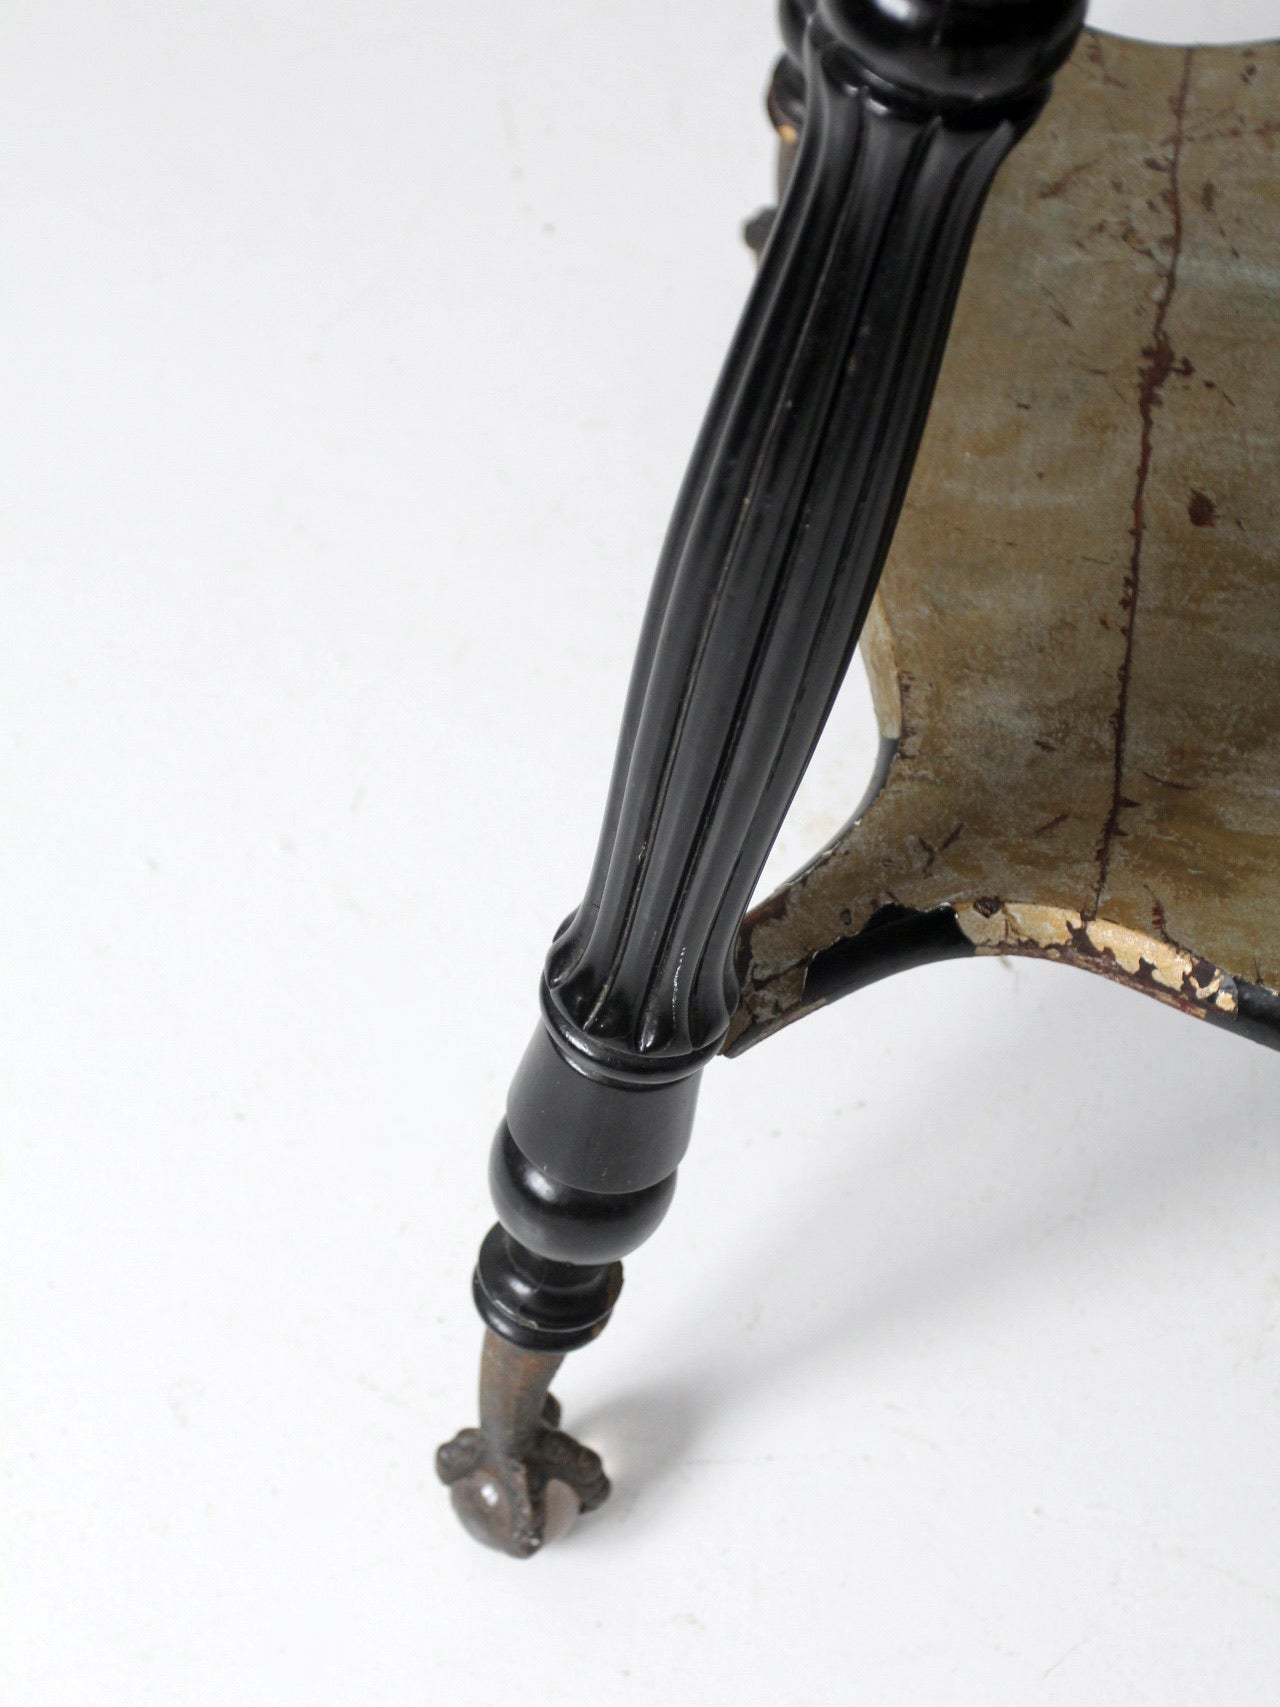 antique claw and ball foot end table